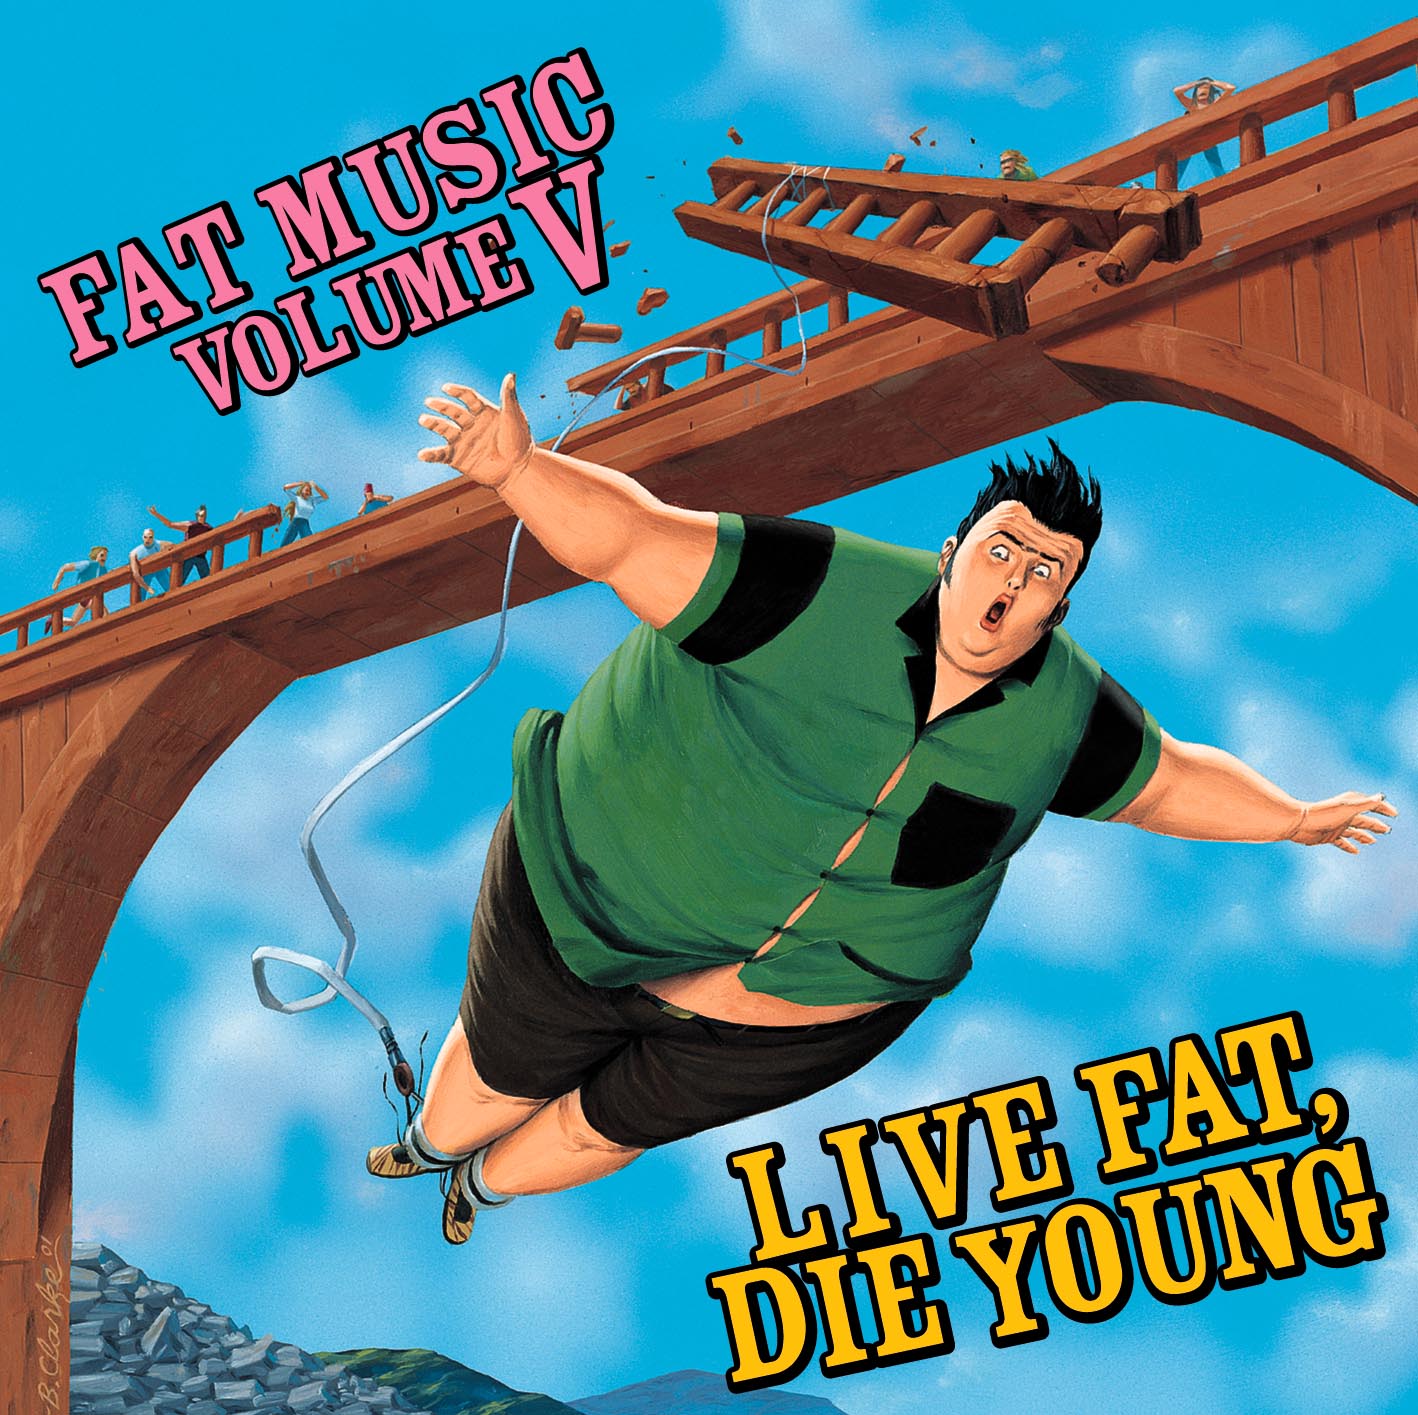 Fat Music Vol. V: Live Fat, Die Young